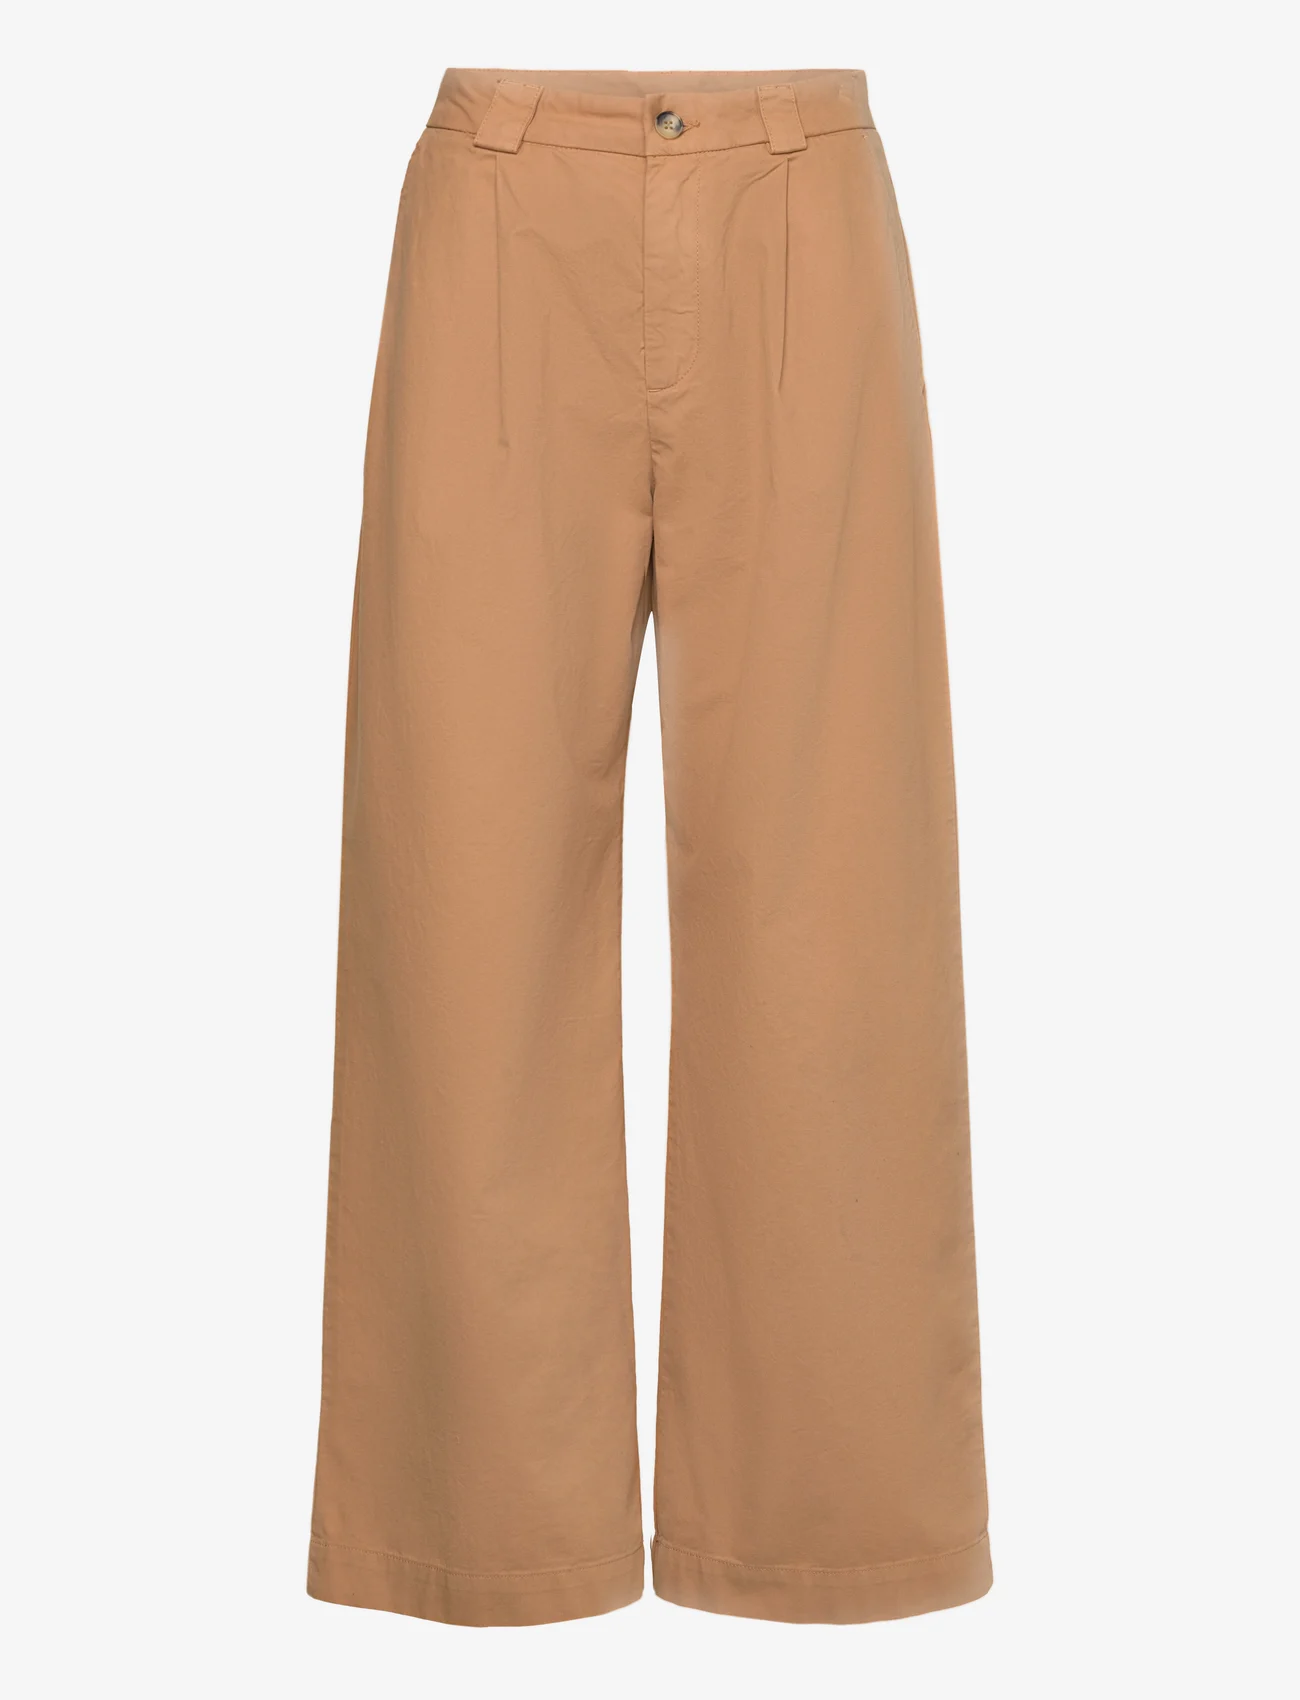 Hope - Relaxed Pleated Chinos - beige chino - 0